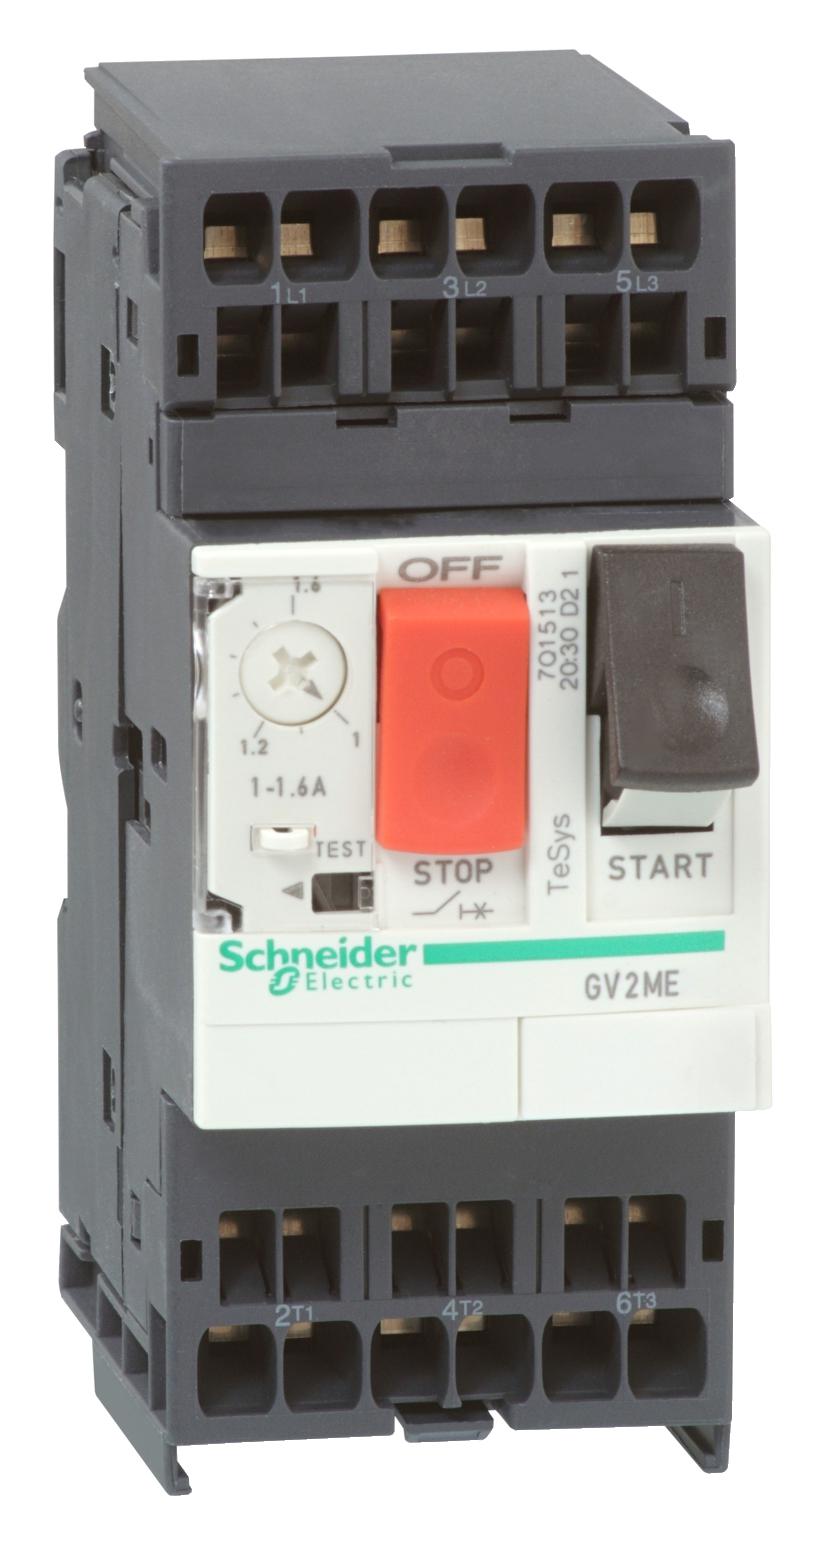 GV2ME213 THERMAL MAGNETIC CIRCUIT BREAKER SCHNEIDER ELECTRIC